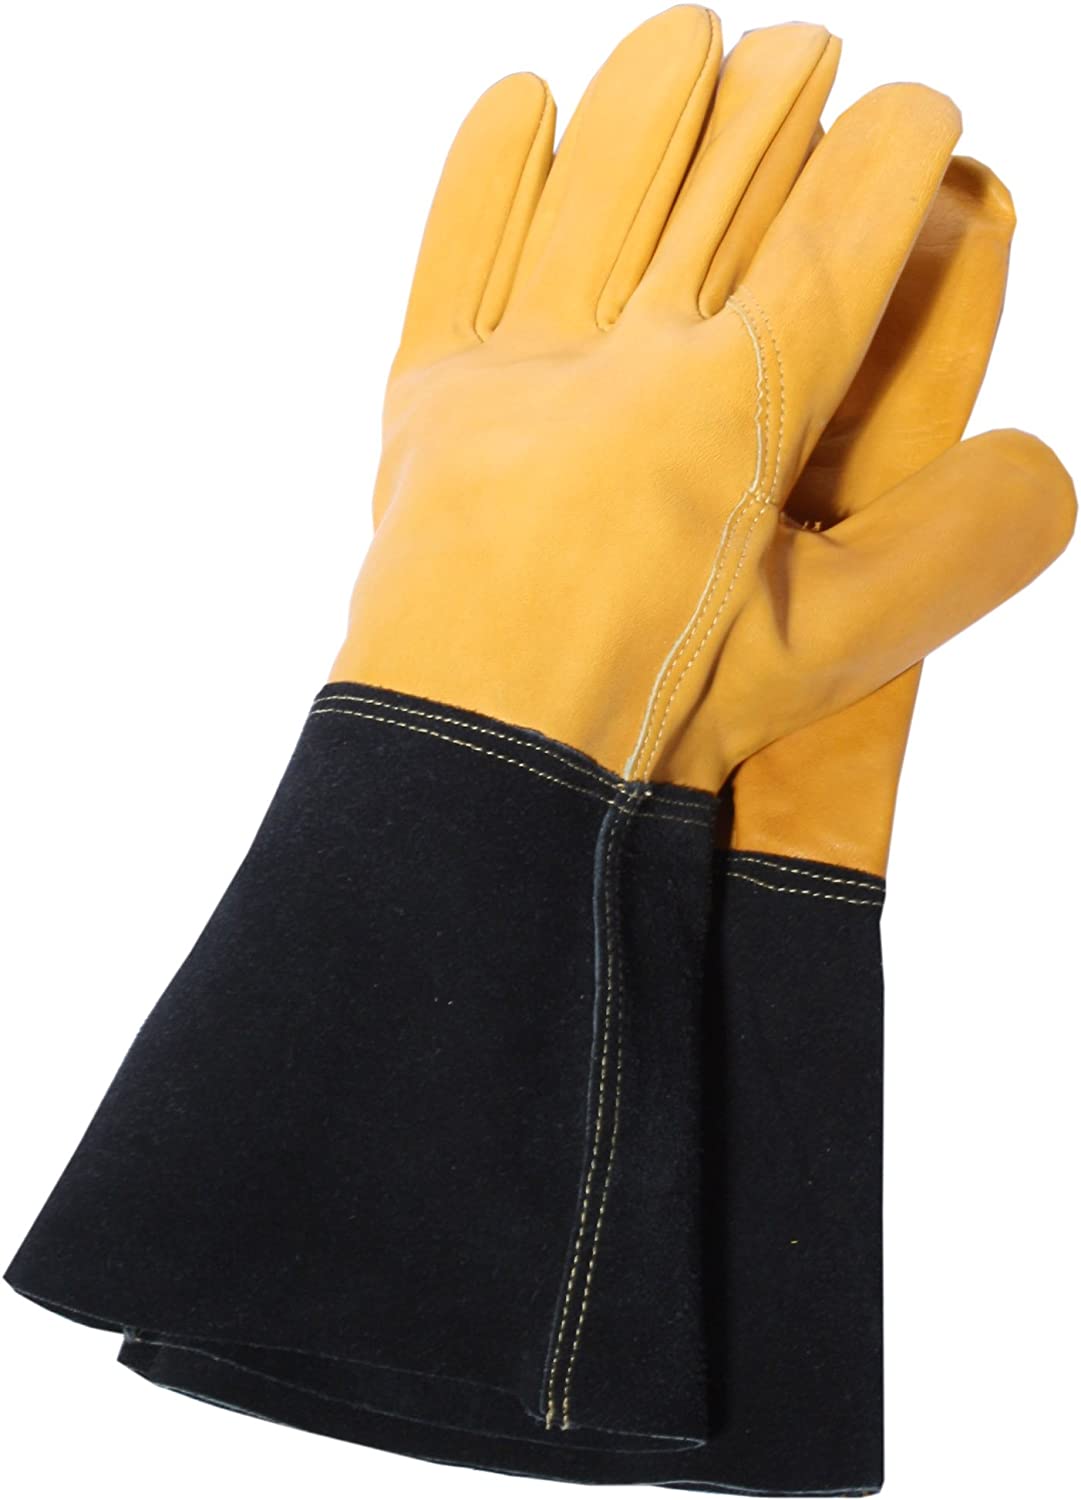 Town & Country Deluxe Premium Leather Gauntlet Gloves Medium